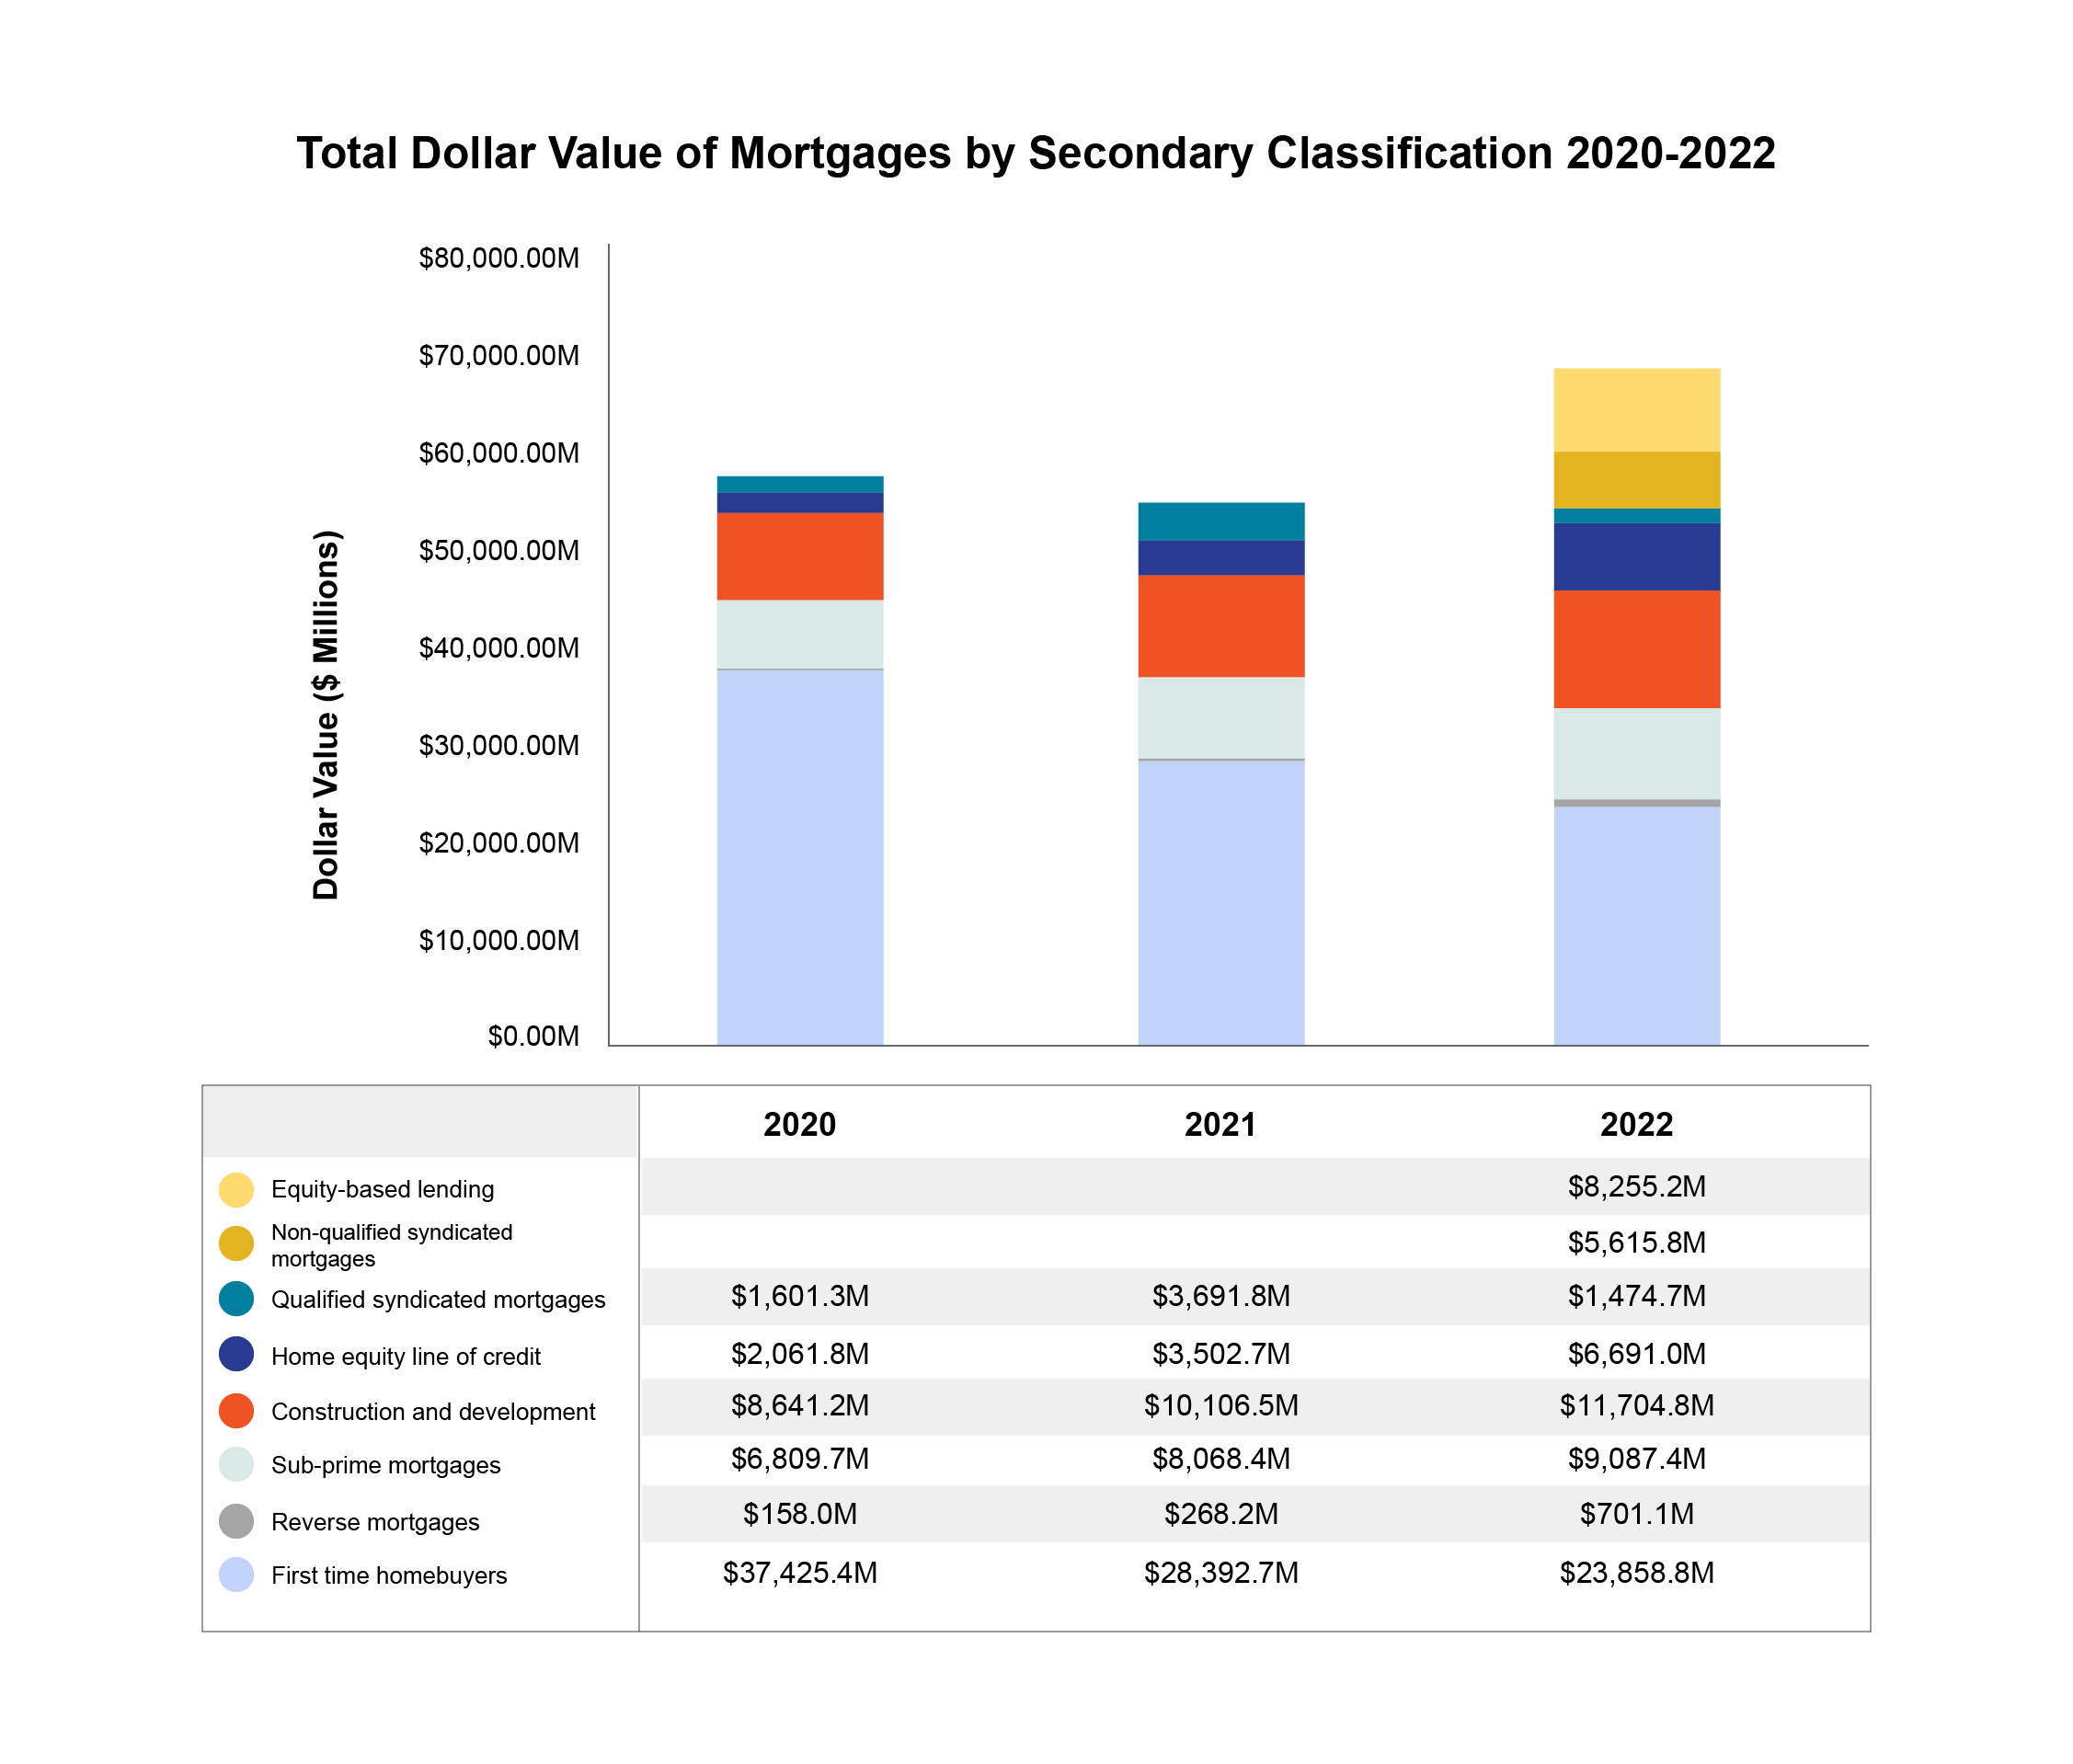 Total dollar value of mortgages by secondary mortgage classification (2020-2022)